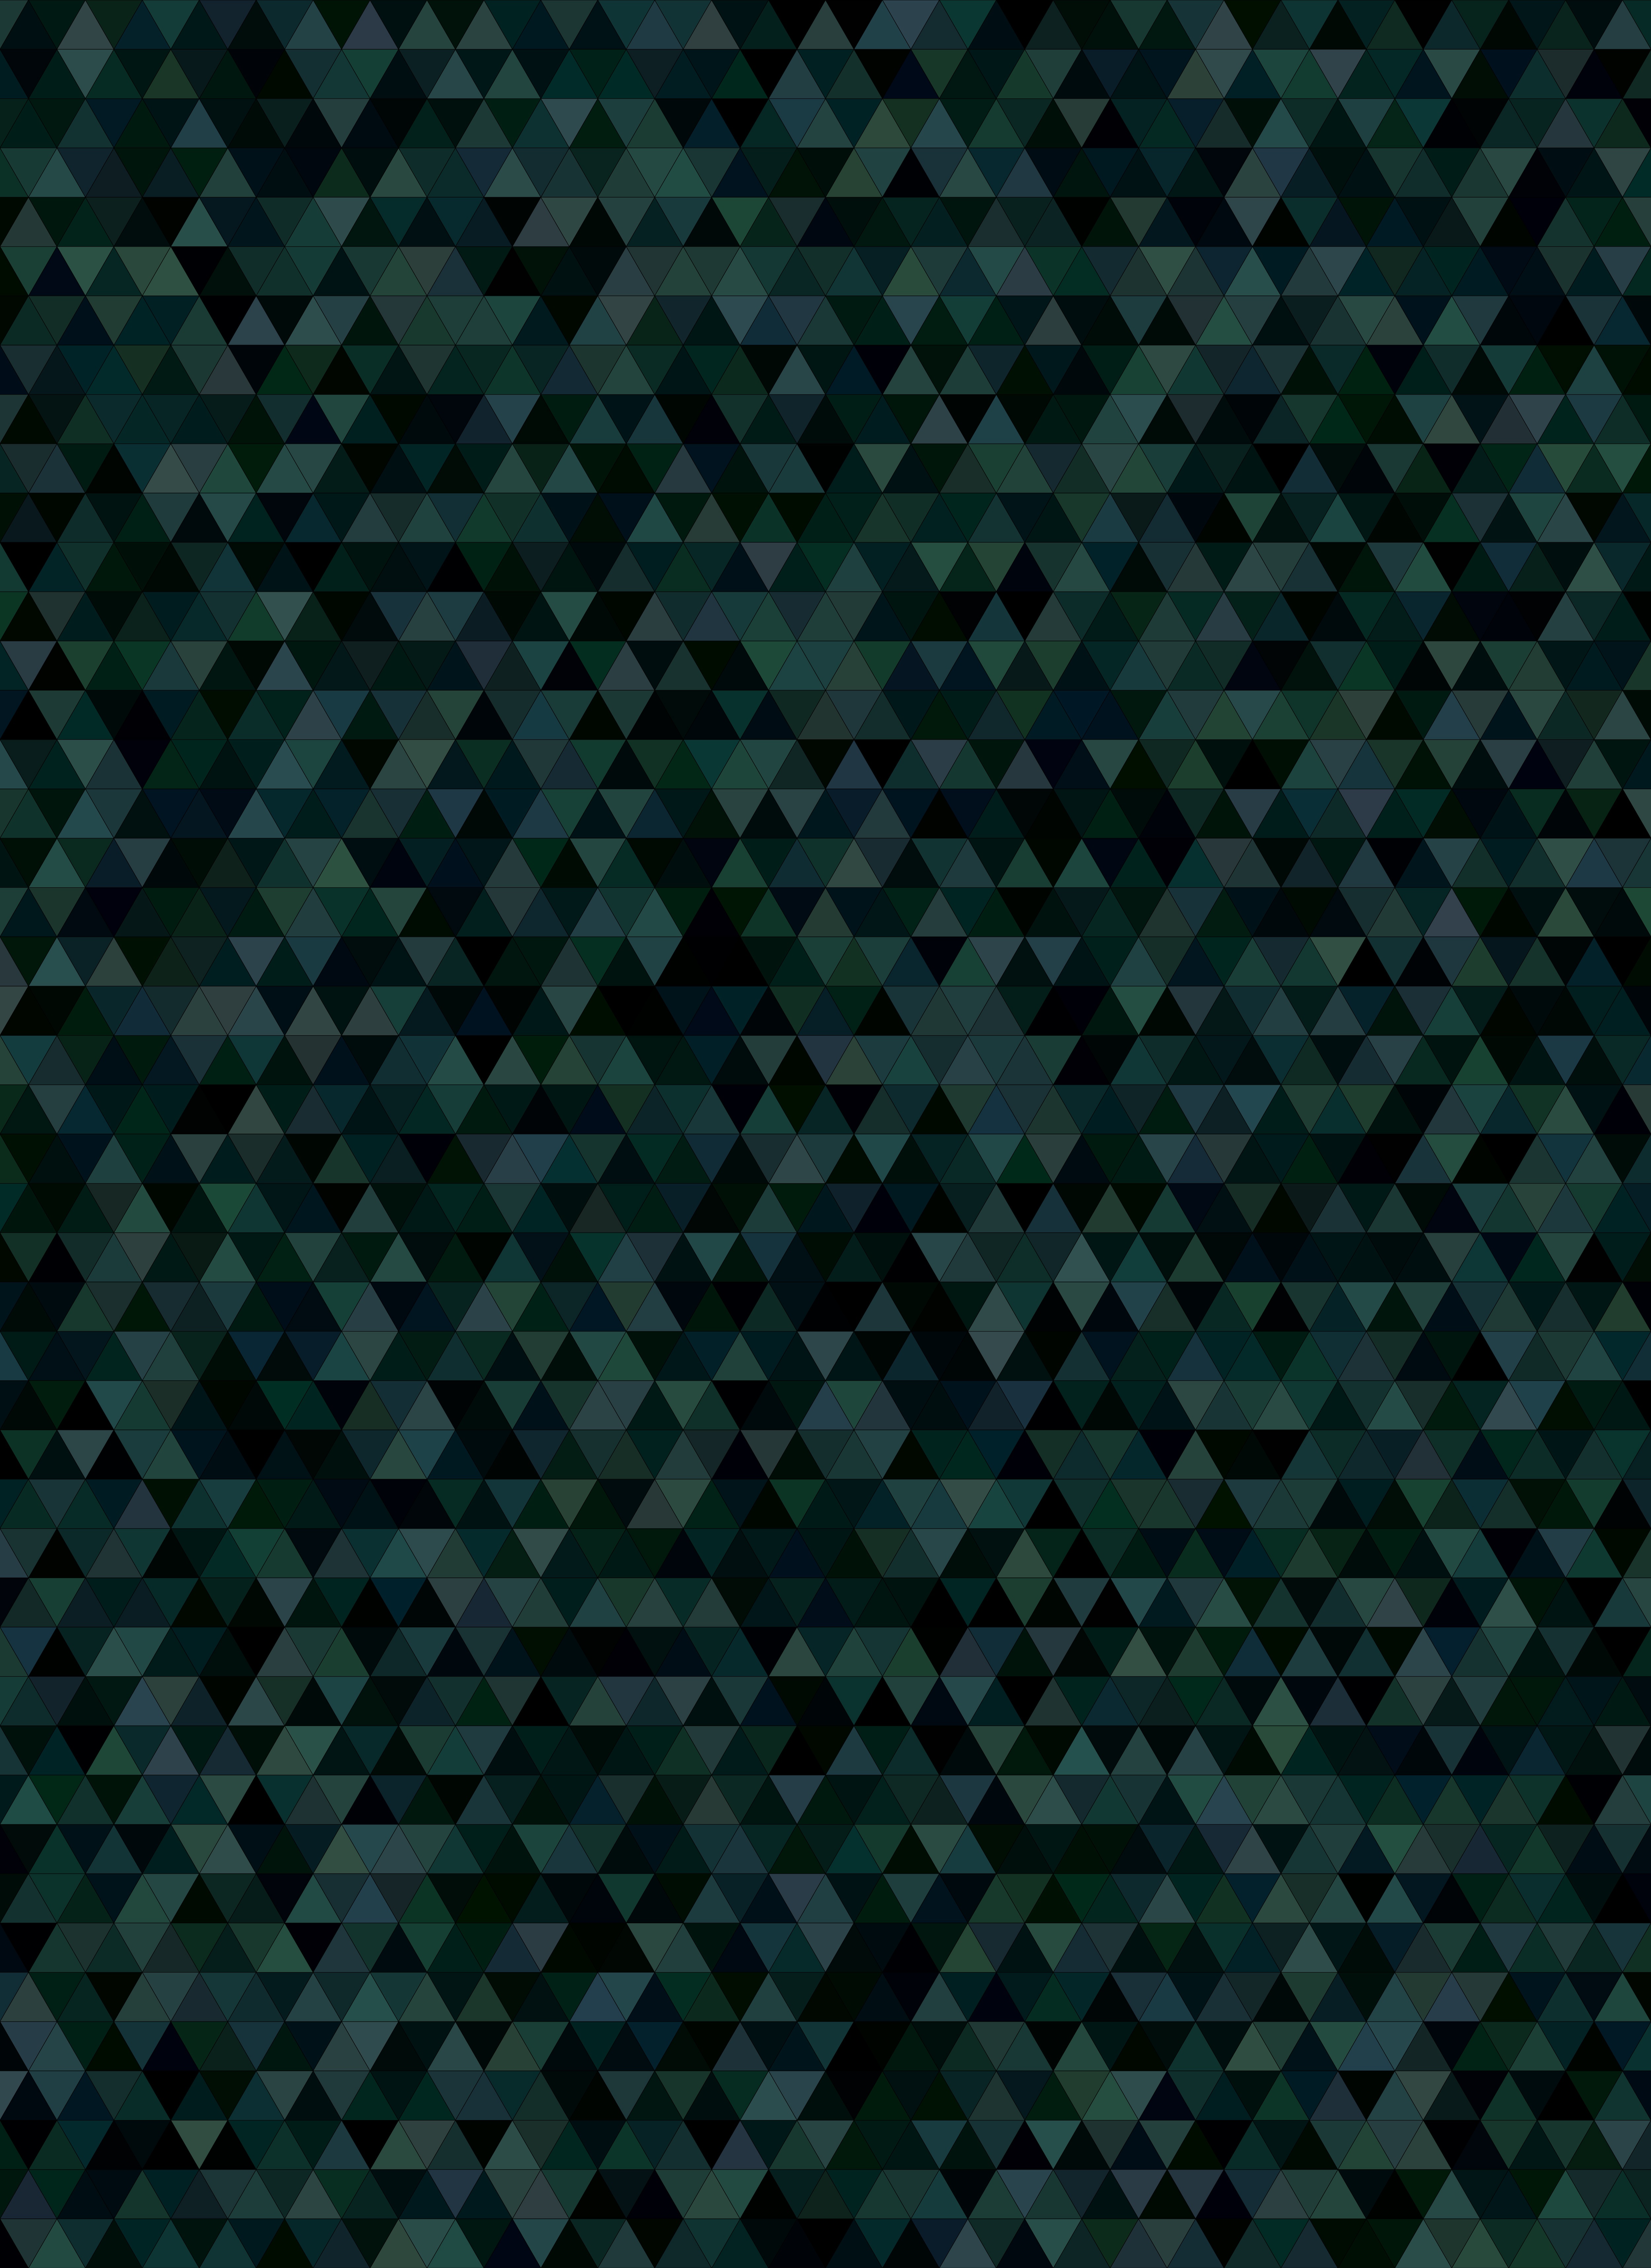 Popular Triangles Image for Phone